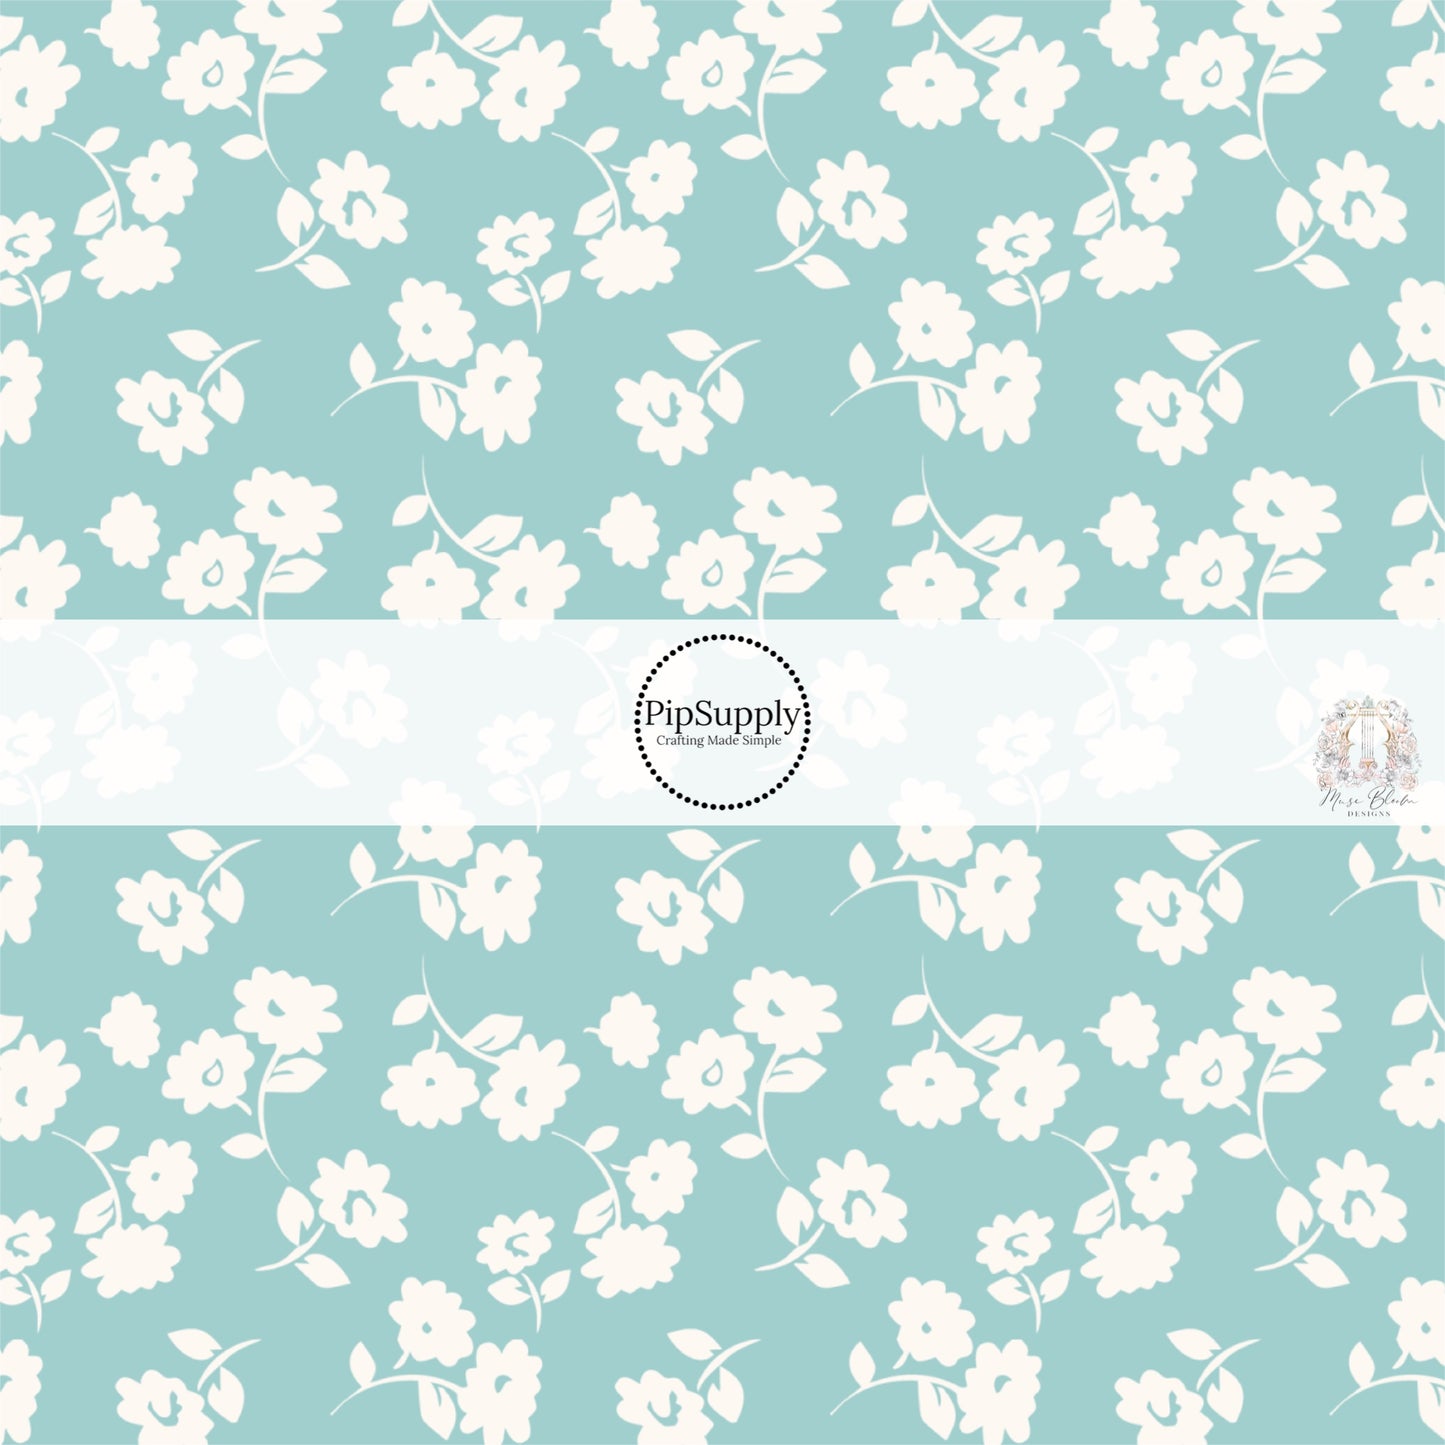 These floral themed seafoam fabric by the yard features light cream flowers on seafoam. This fun summer floral themed fabric can be used for all your sewing and crafting needs! 